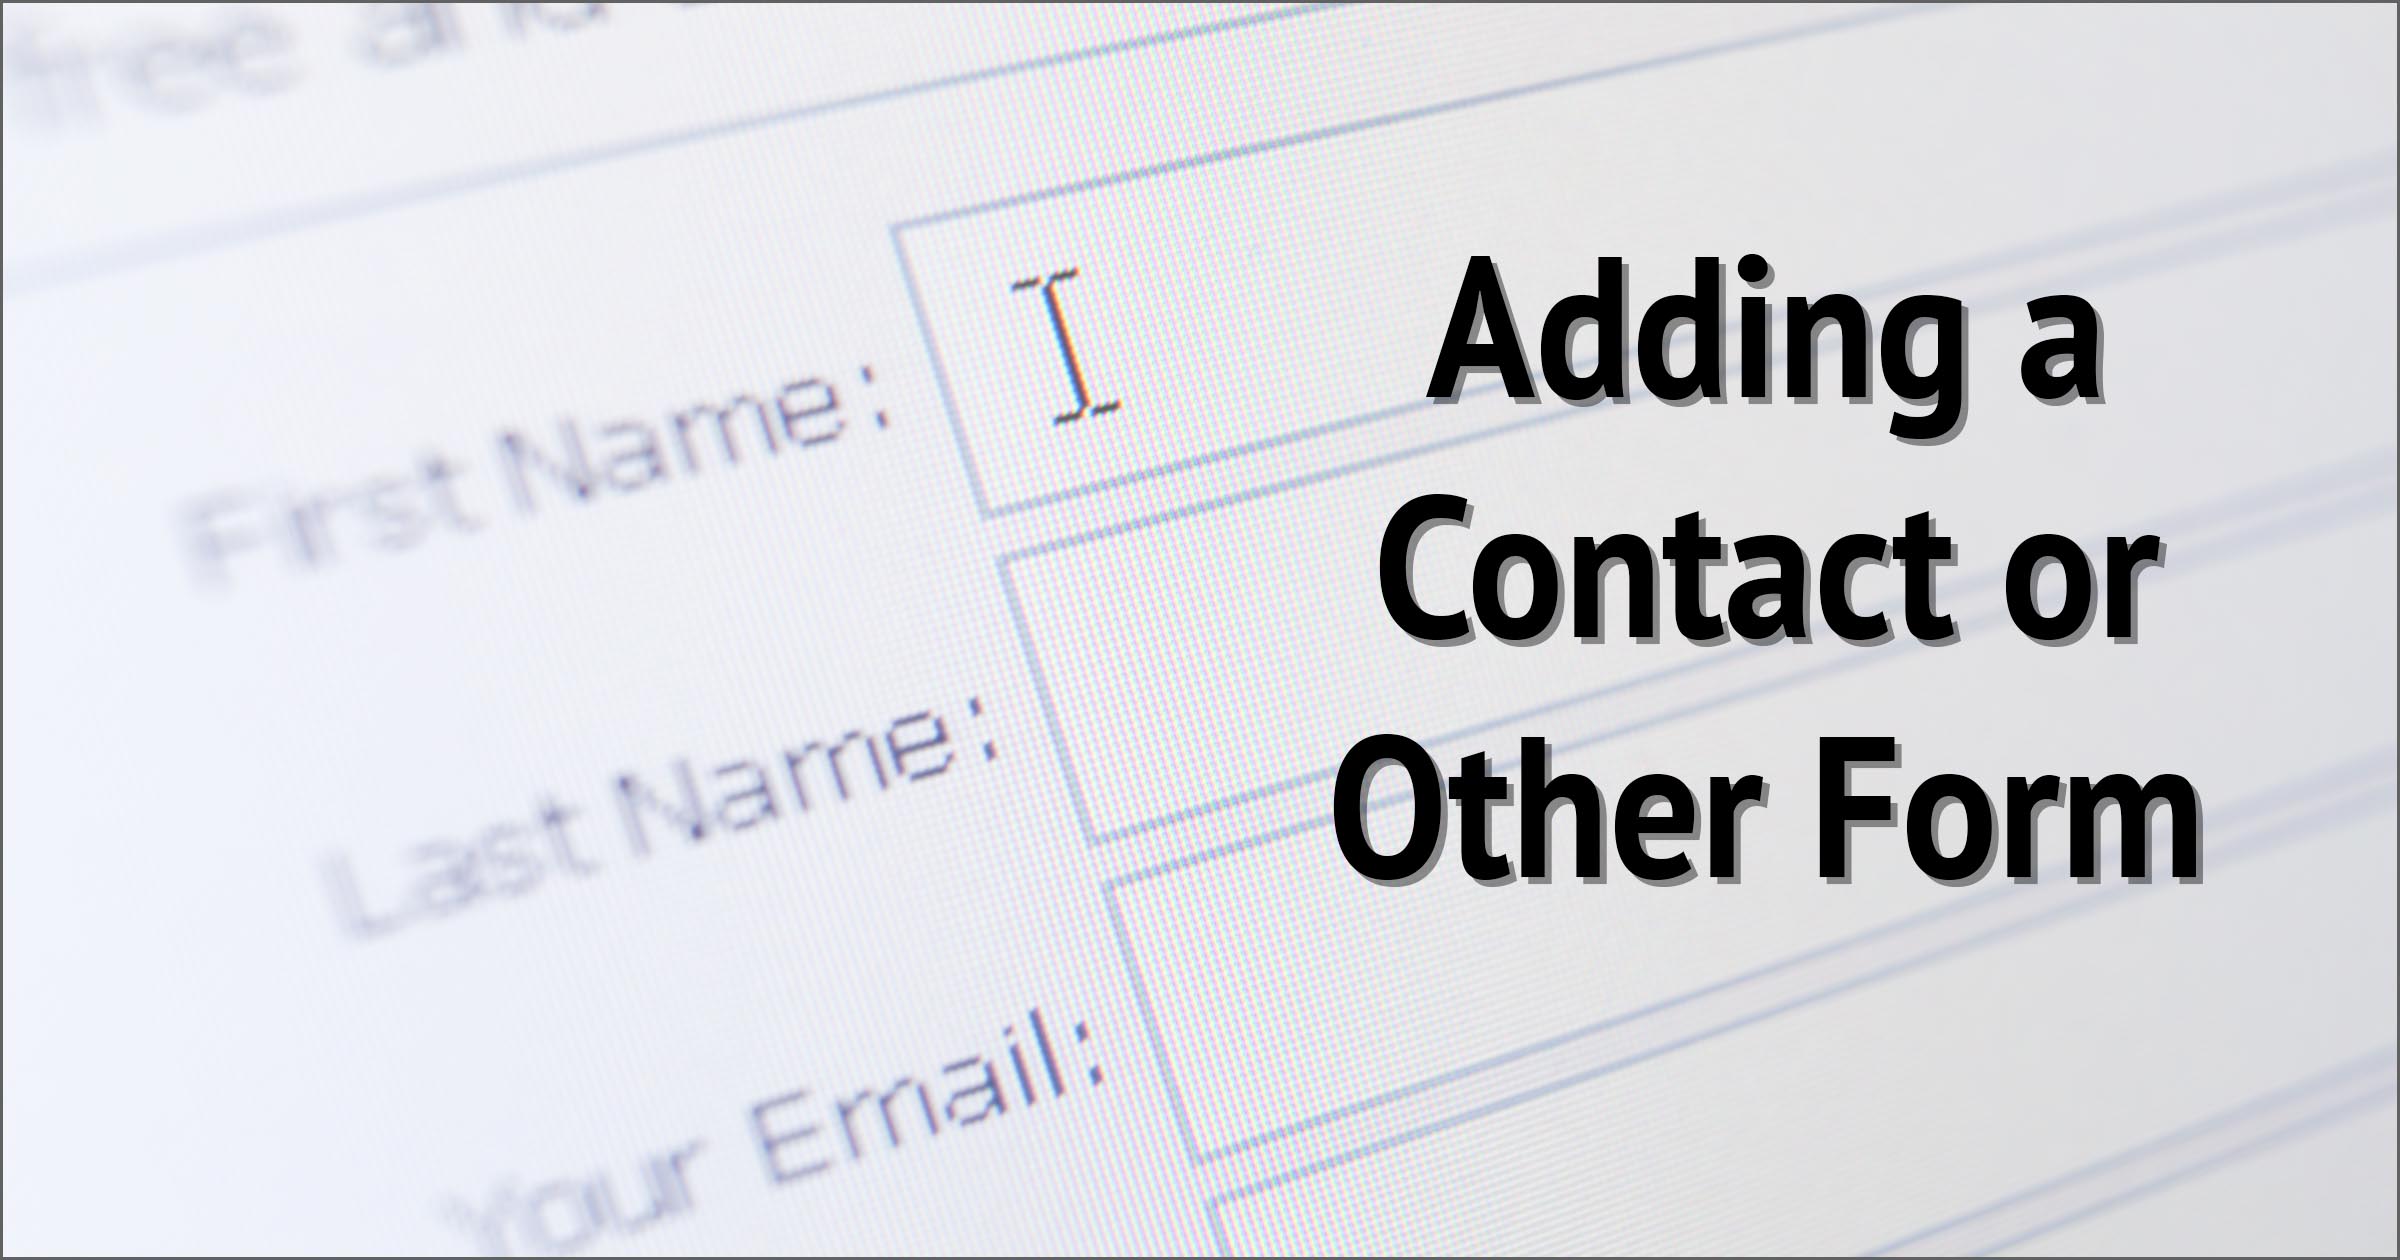 Adding a Contact or Other Form